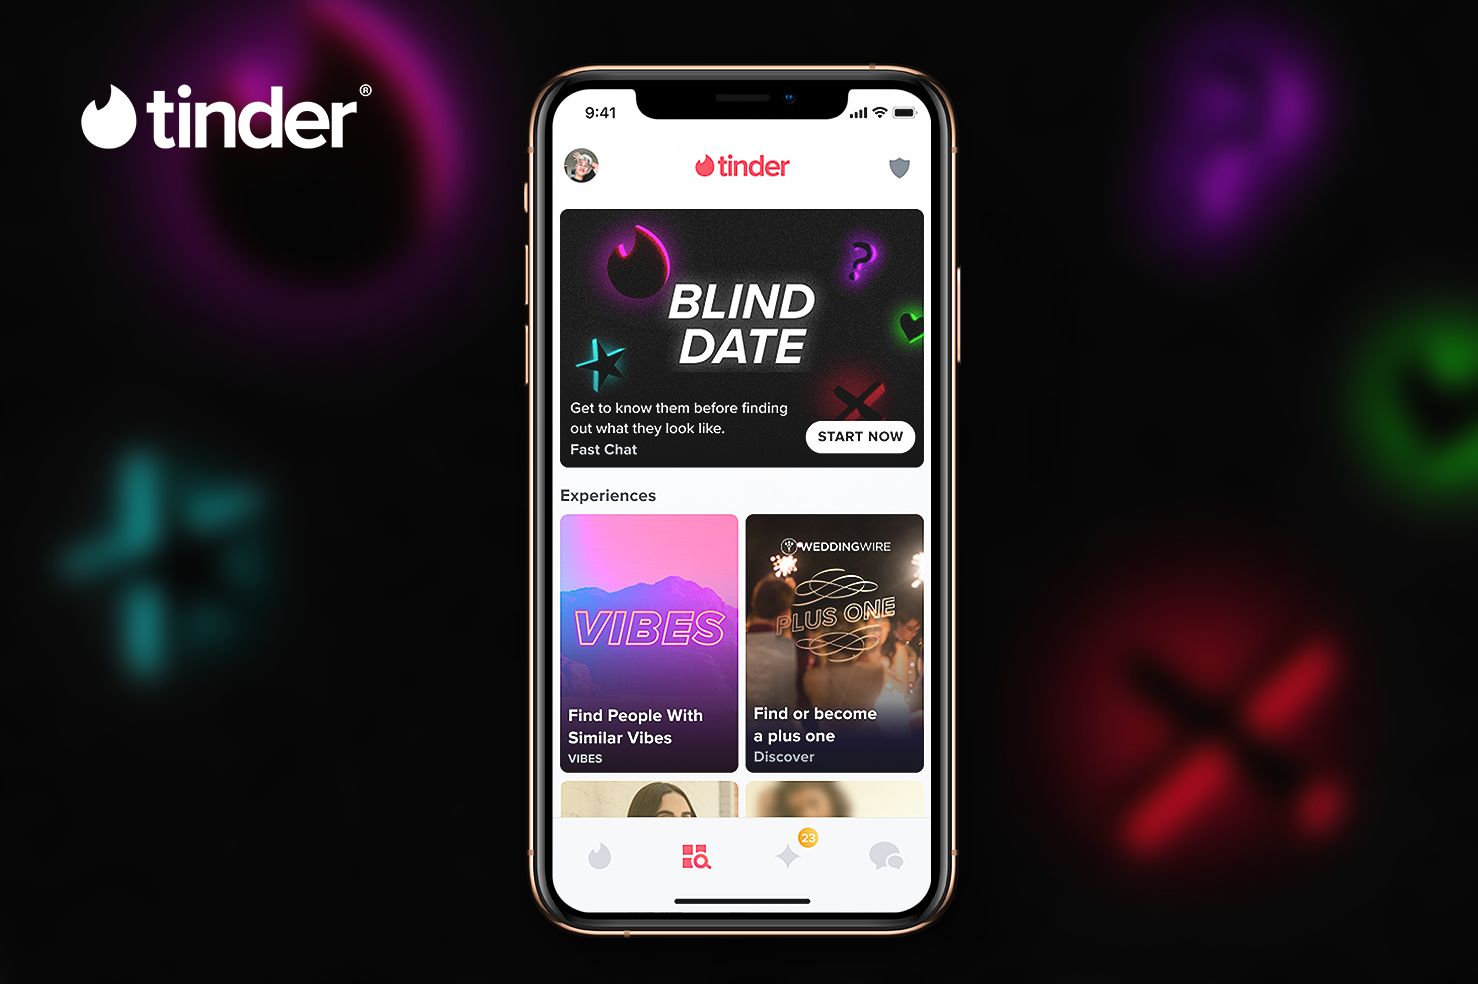 Tinder’s new Blind Date experience (Tinder/PA)